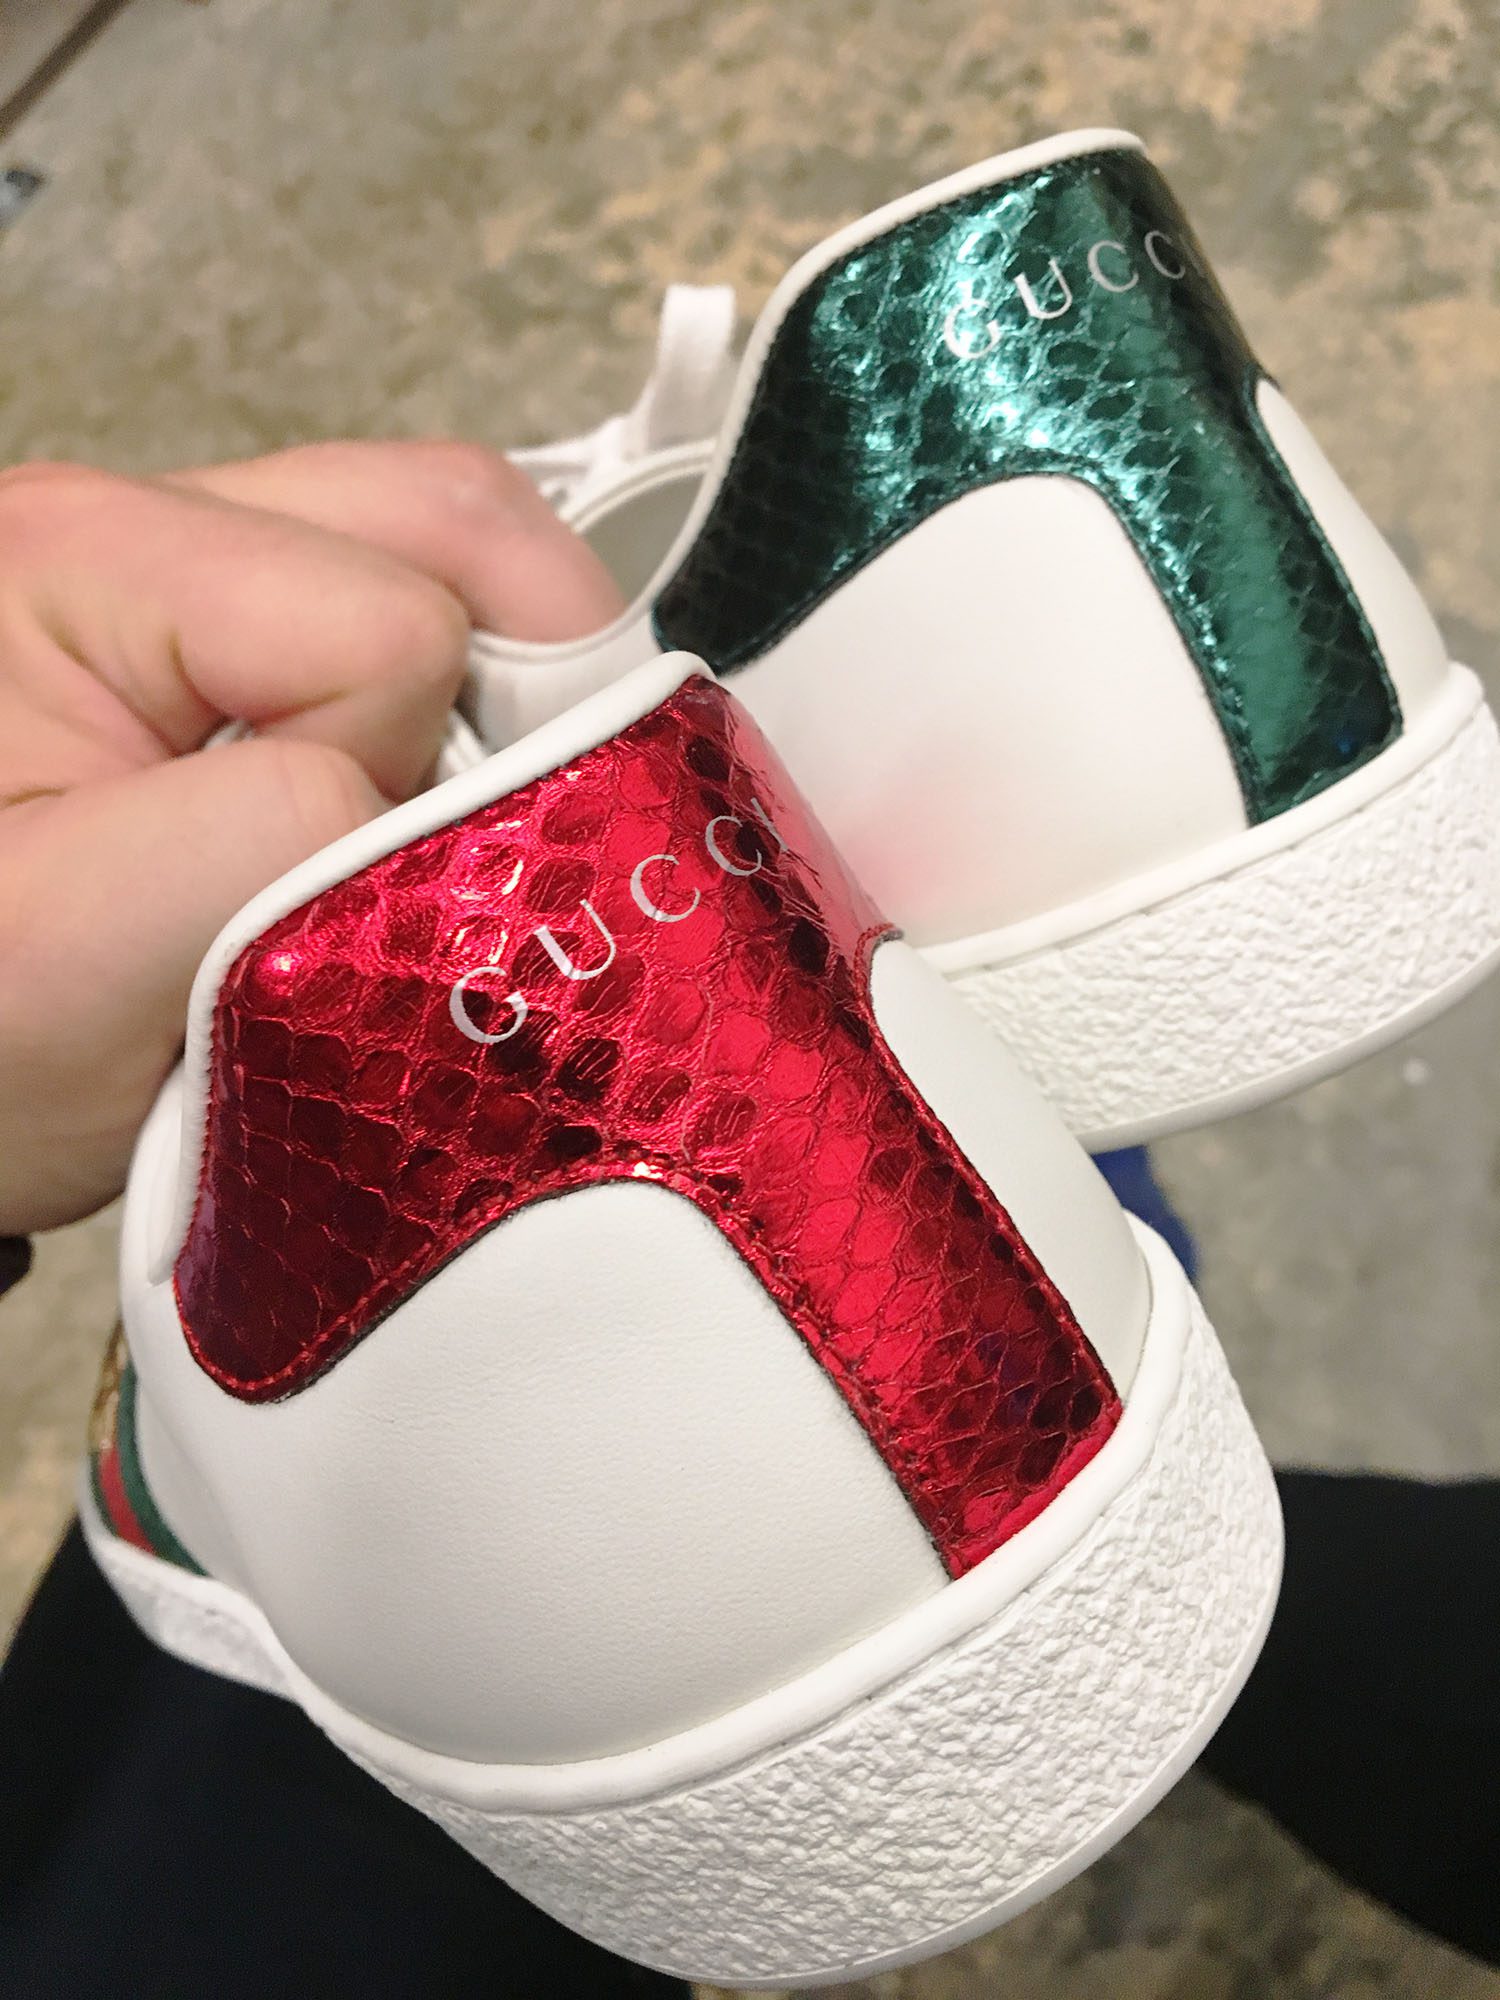 GUCCI ACE MENS SNEAKER REVIEW 2020